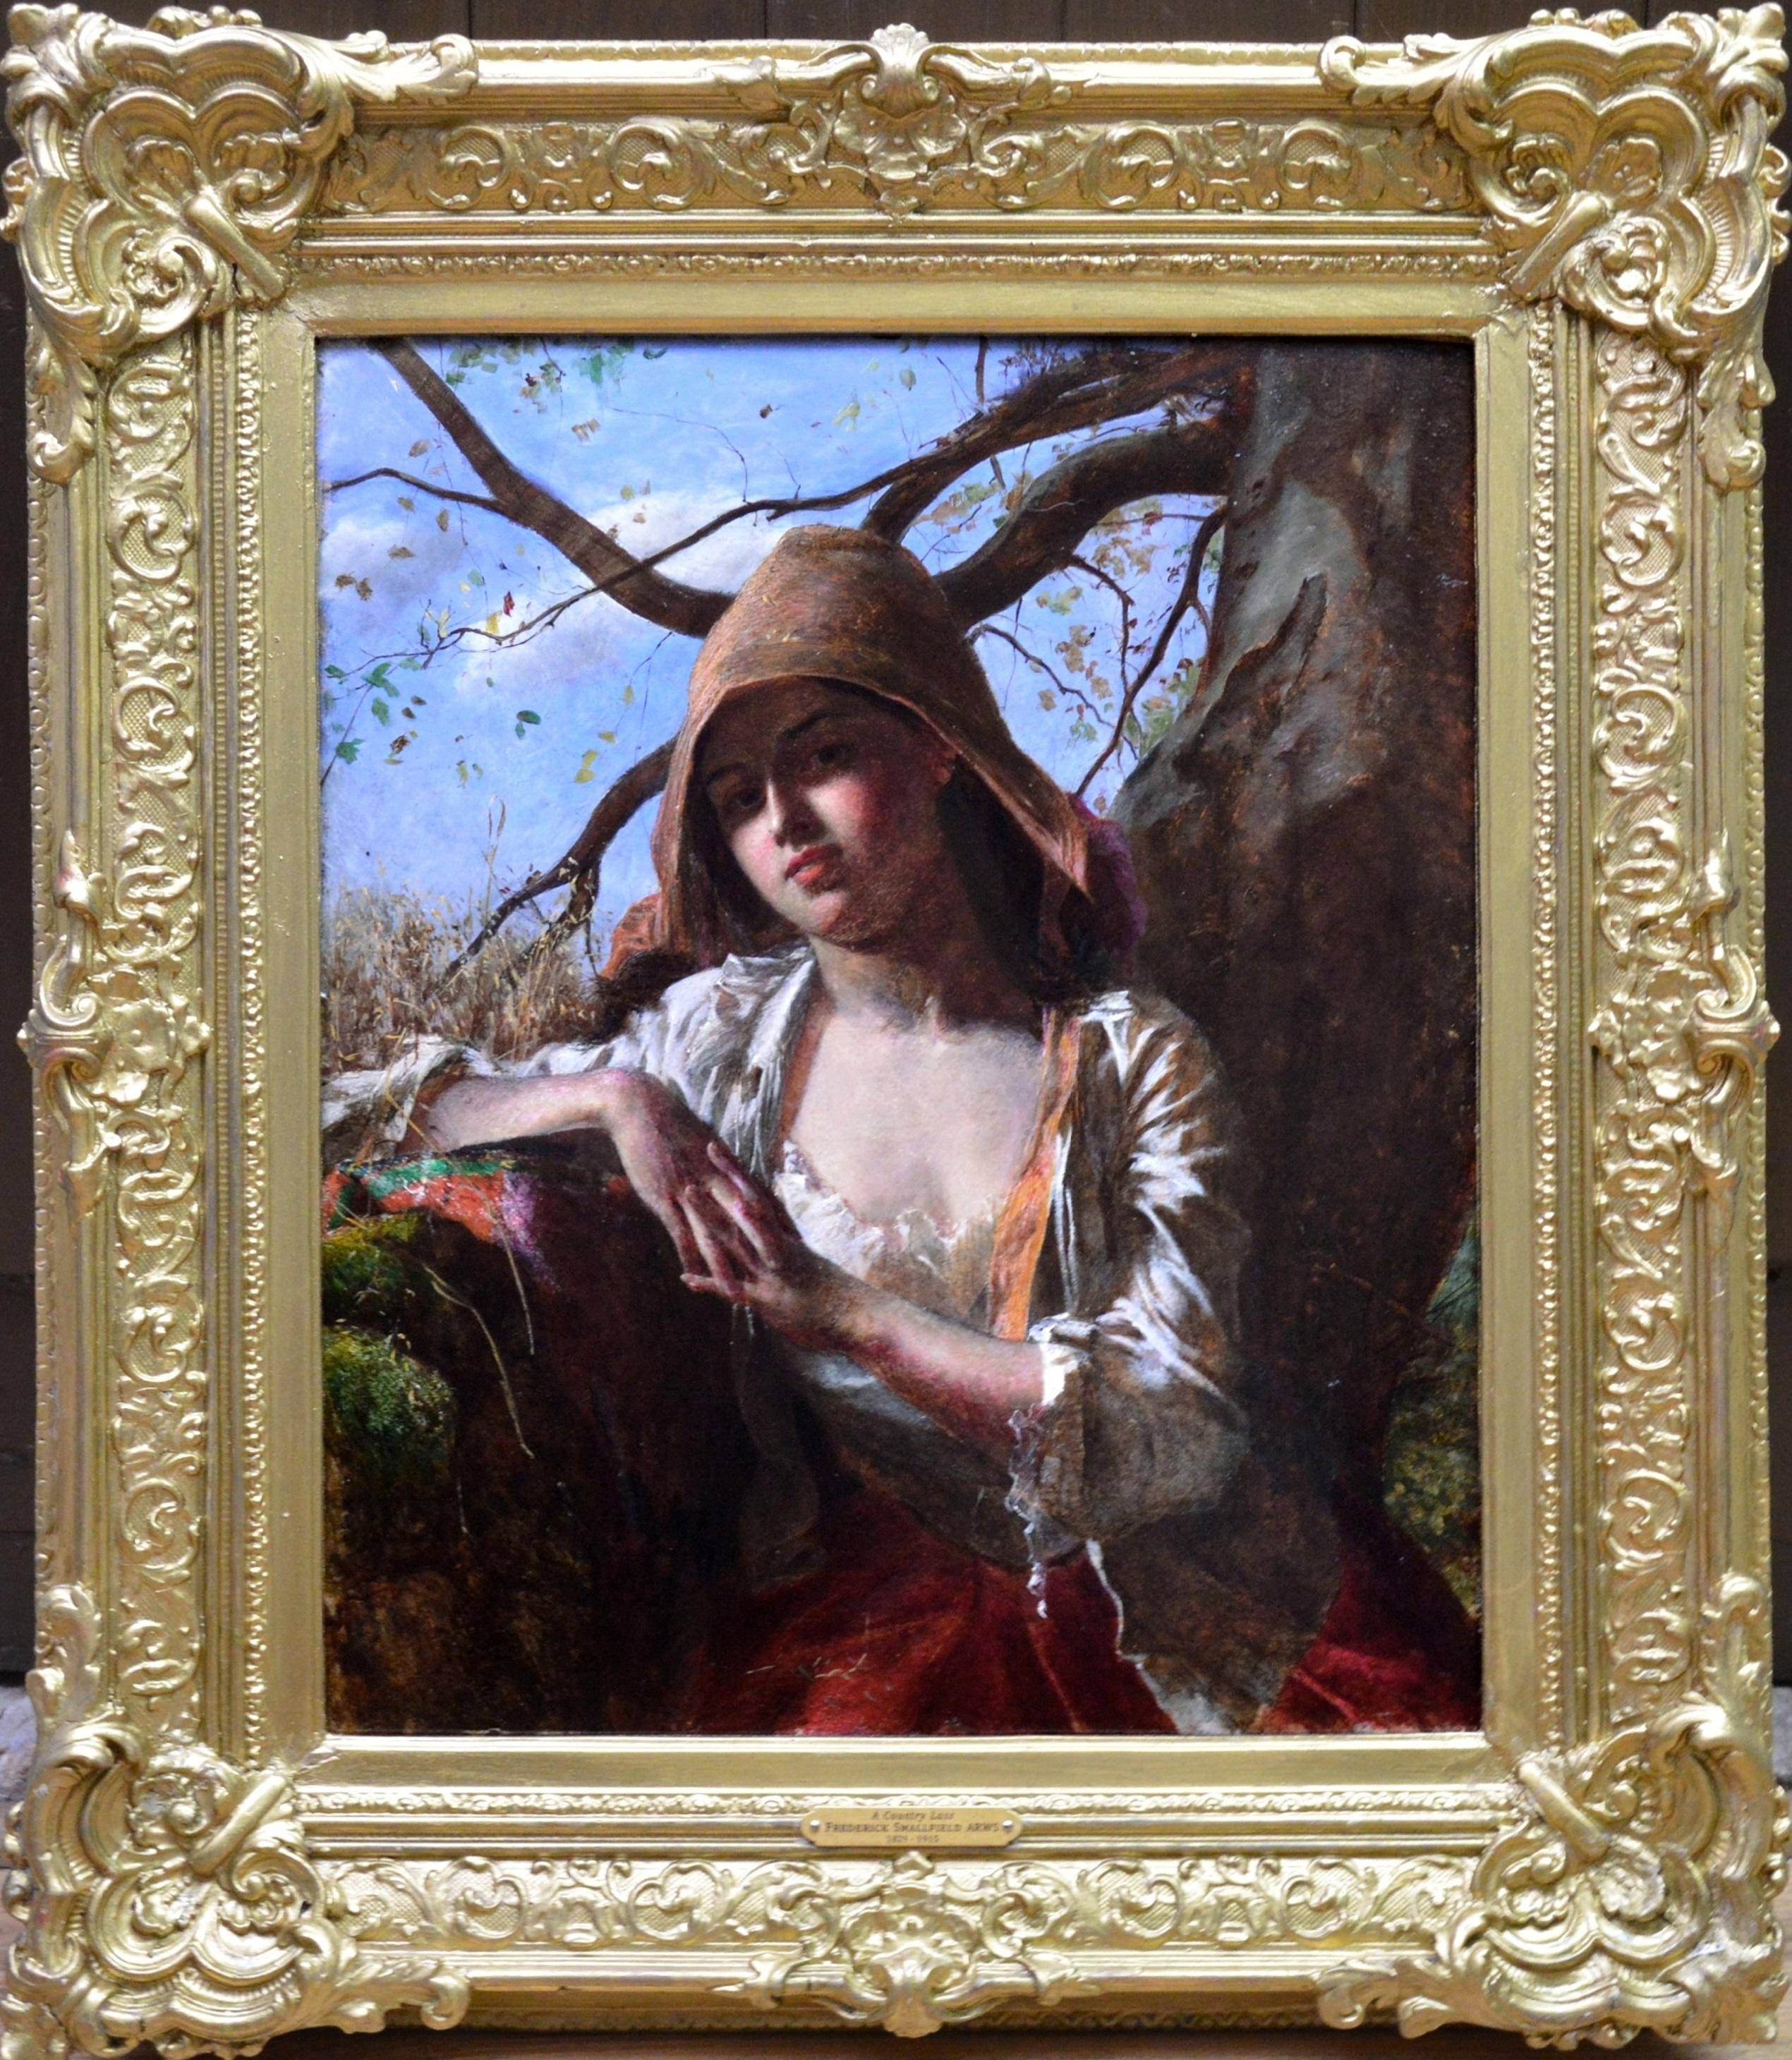 Frederick Smallfield Figurative Painting - A Country Lass - 19th Century Pre-Raphaelite Portrait Oil Painting of Young Girl